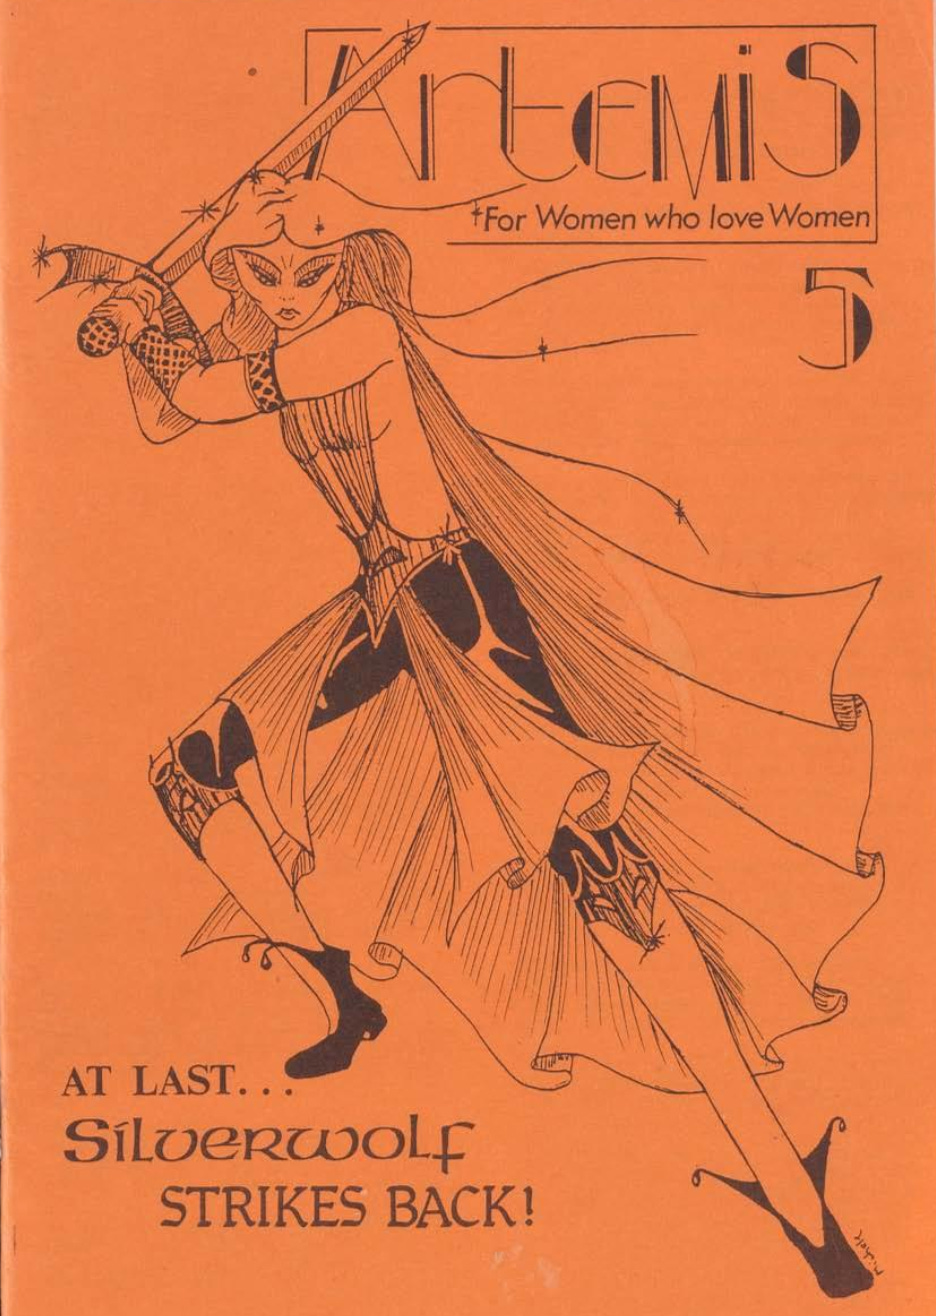 Cover of Issue #5 of Artemis magazine, with a line-drawing illustration of a female warrior wielding a sword.